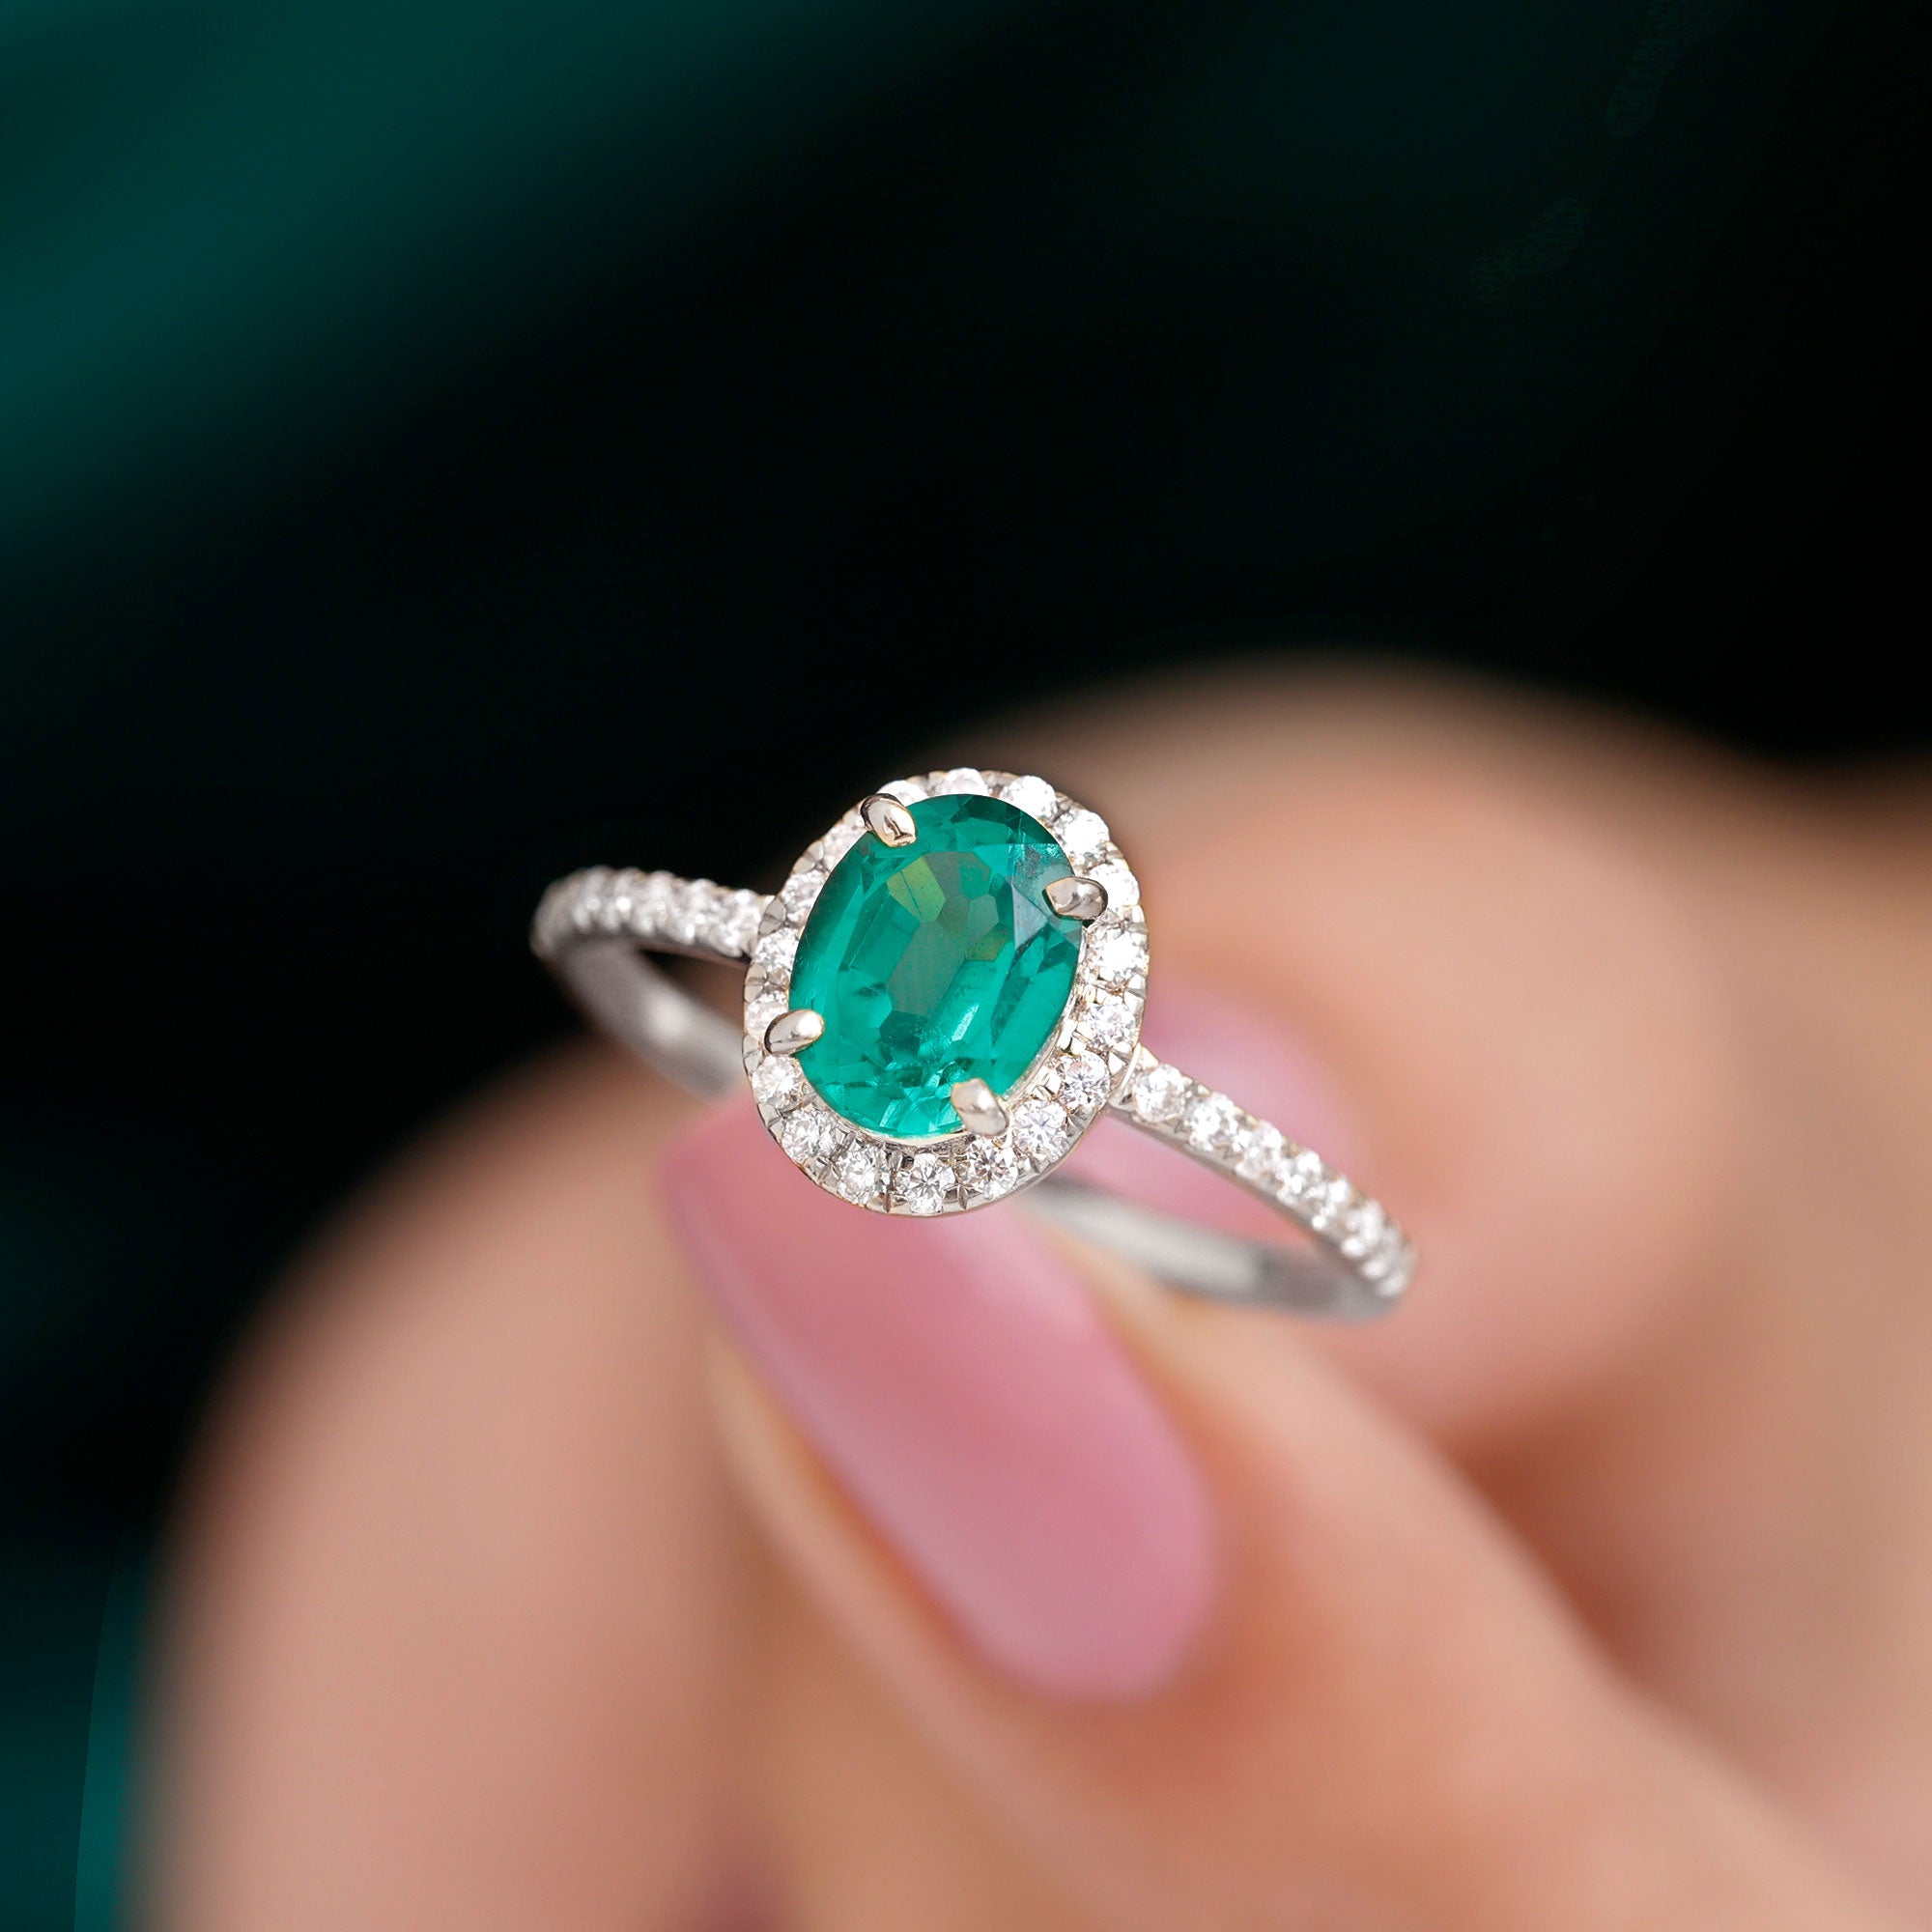 Oval Cut Created Emerald Classic Halo Engagement Ring with Diamond Lab Created Emerald - ( AAAA ) - Quality - Rosec Jewels